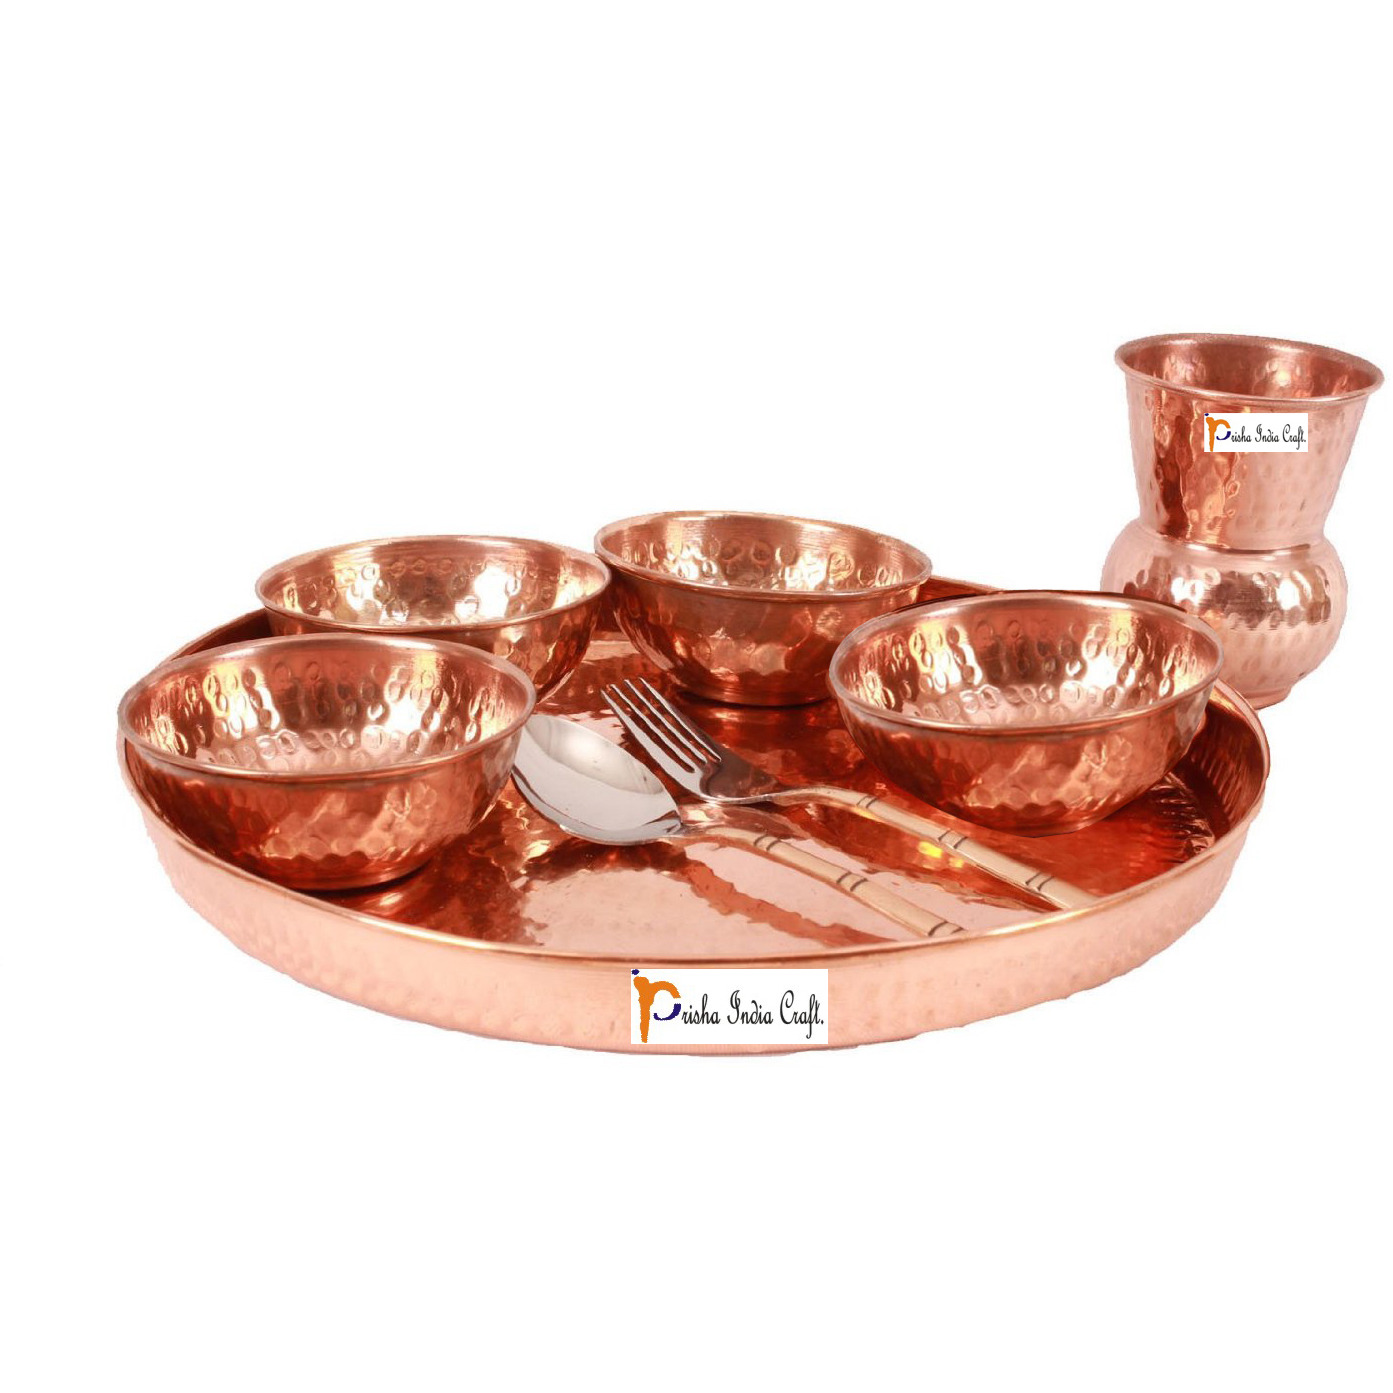 Prisha India Craft B. Set of 2 Dinnerware Traditional 100% Pure Copper Dinner Set of Thali Plate, Bowls, Glass and Spoon, Dia 12  With 1 Pure Copper Pitcher Jug - Christmas Gift